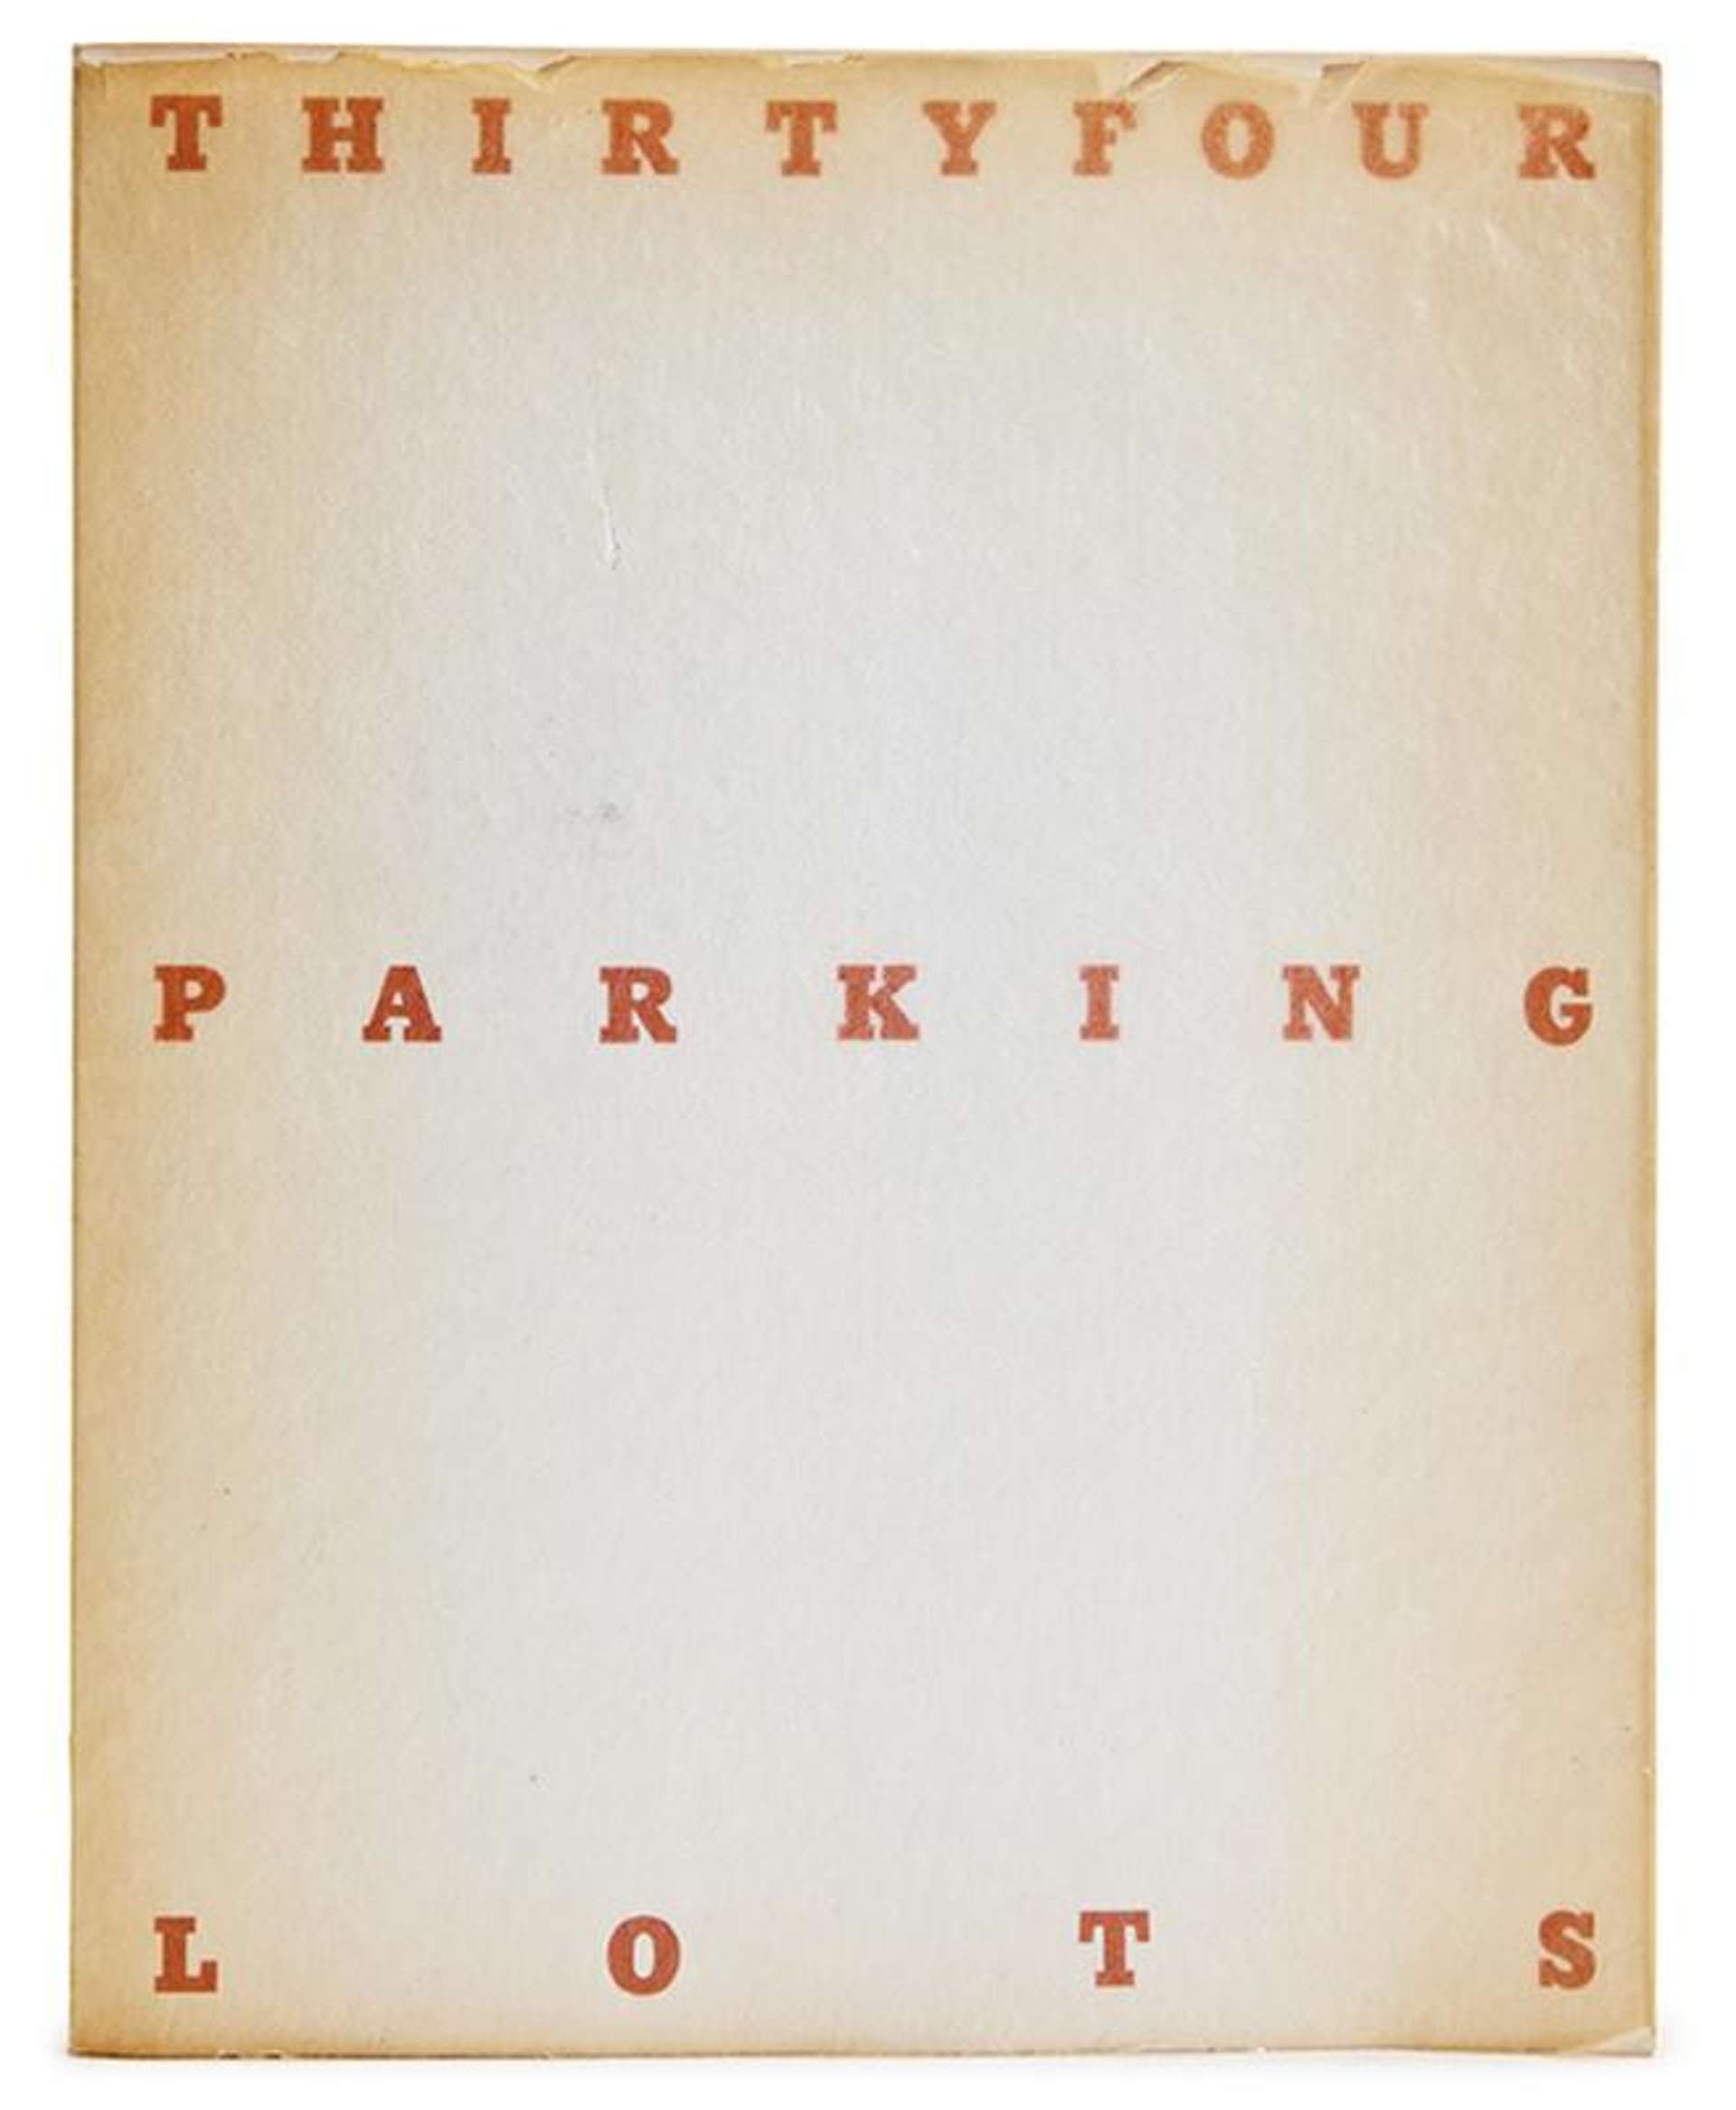 Front cover of Ed Ruscha's 1967 artist's book titled 'Thirtyfour Parking Lots In Los Angeles'. The words 'Thirtyfour Parking Lots' are depicted in a muted orange, centred against an ivory background.